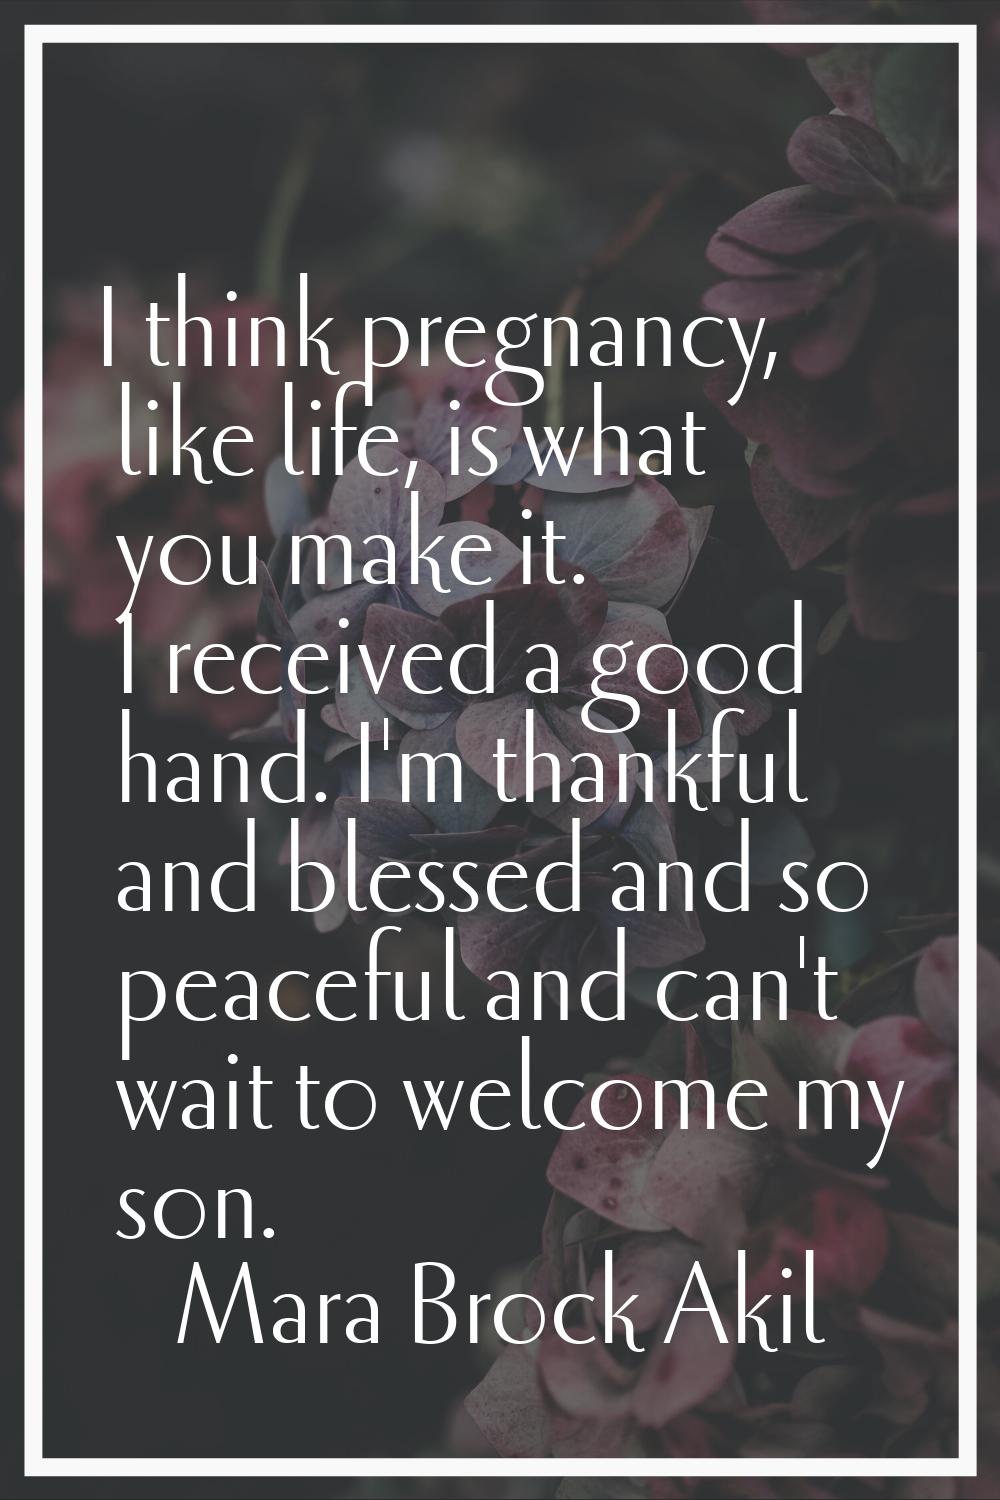 I think pregnancy, like life, is what you make it. I received a good hand. I'm thankful and blessed